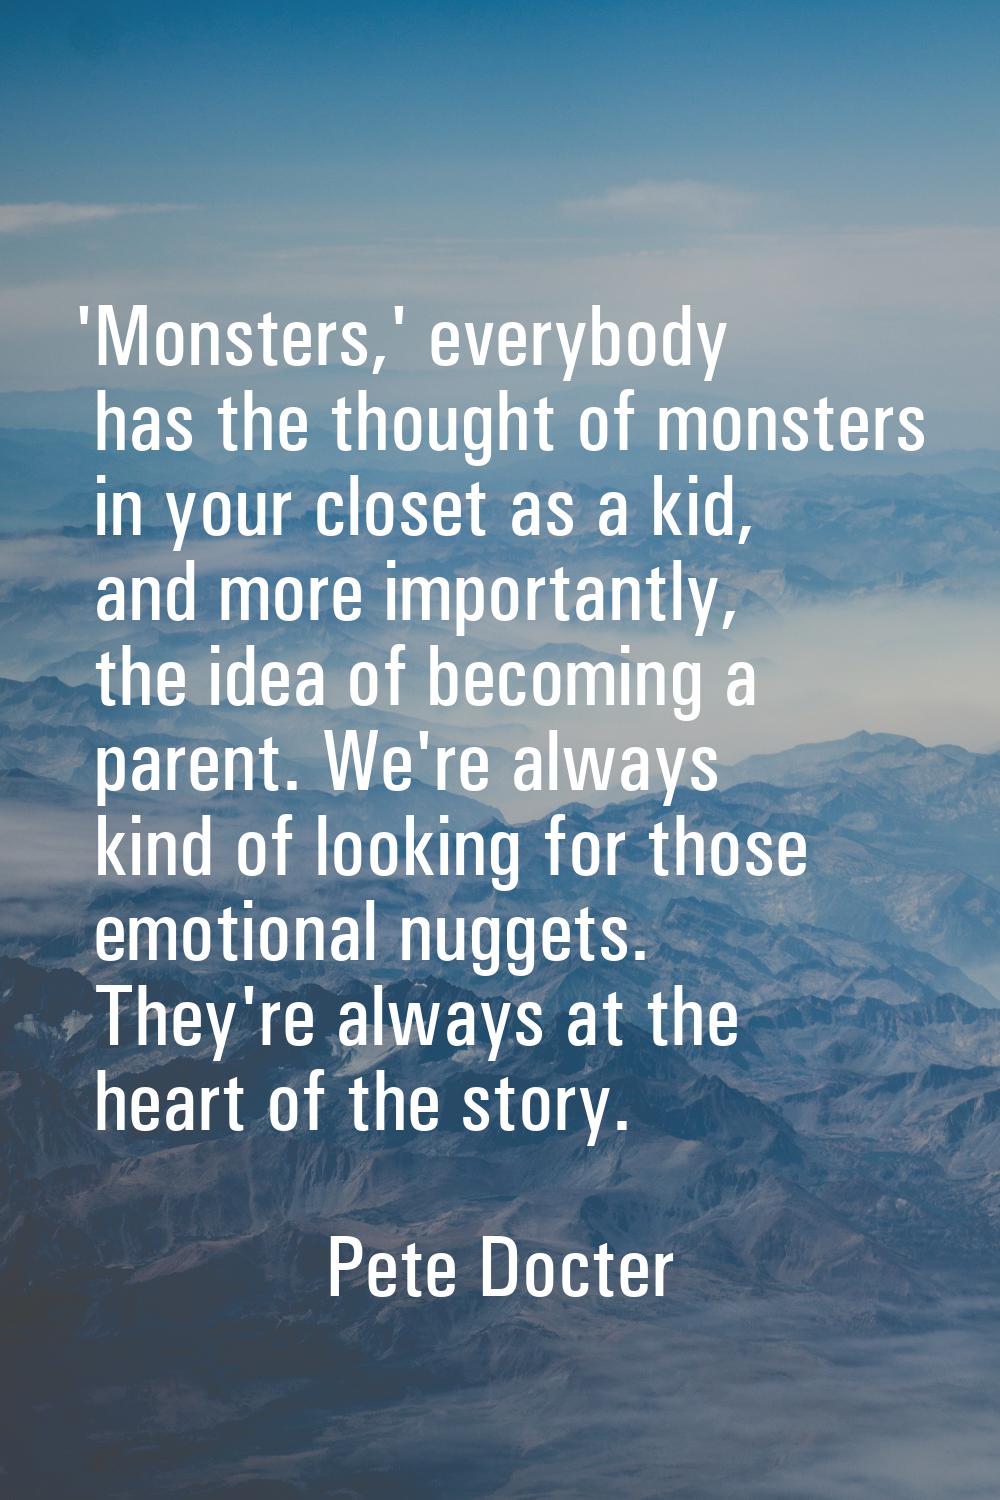 'Monsters,' everybody has the thought of monsters in your closet as a kid, and more importantly, th